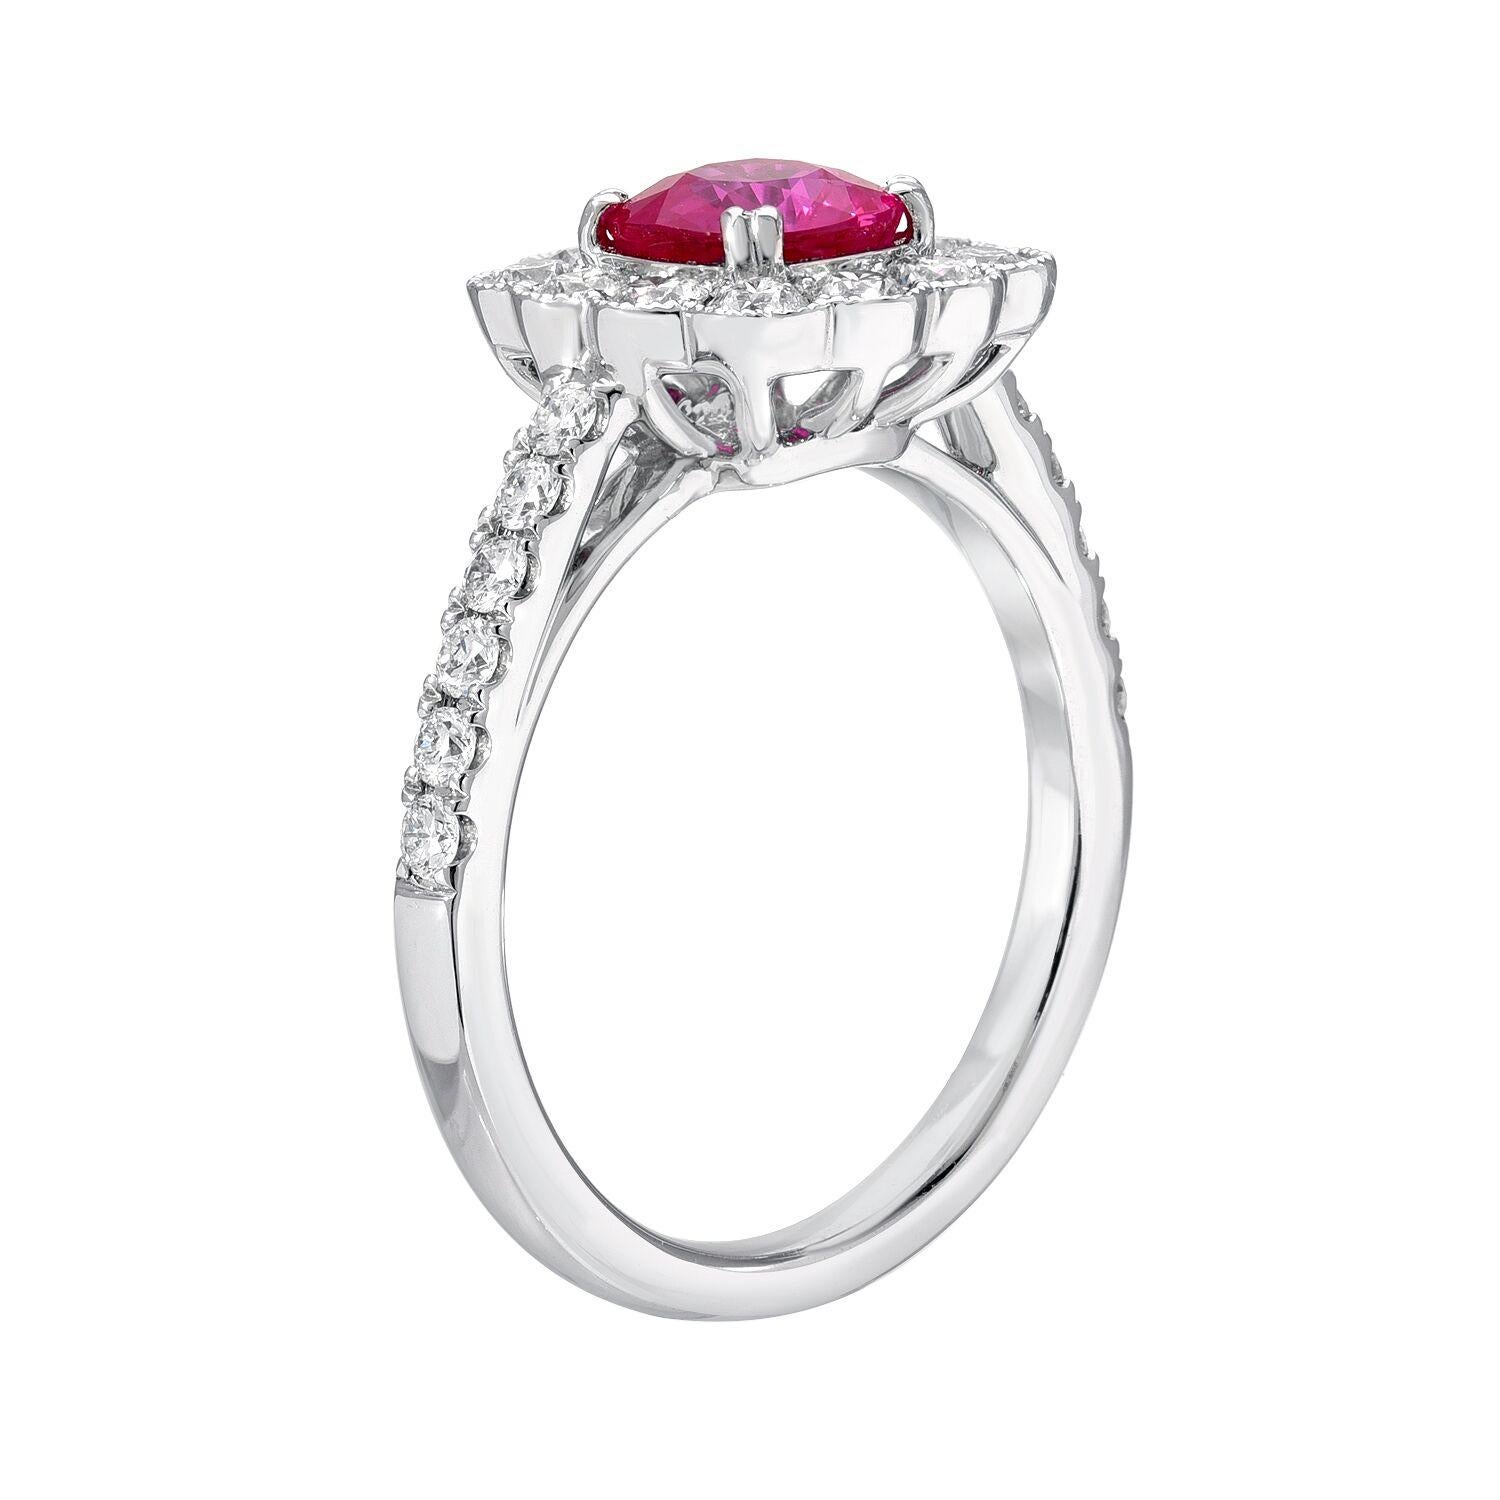 Vibrant Burmese Ruby cushion cut weighing a total of 1.12 carats is set in this classic 0.70 carat total round brilliant diamond, 18K white gold engagement ring or cocktail ring.
Size 6.5. Re-sizing is complimentary upon request.
Returns are